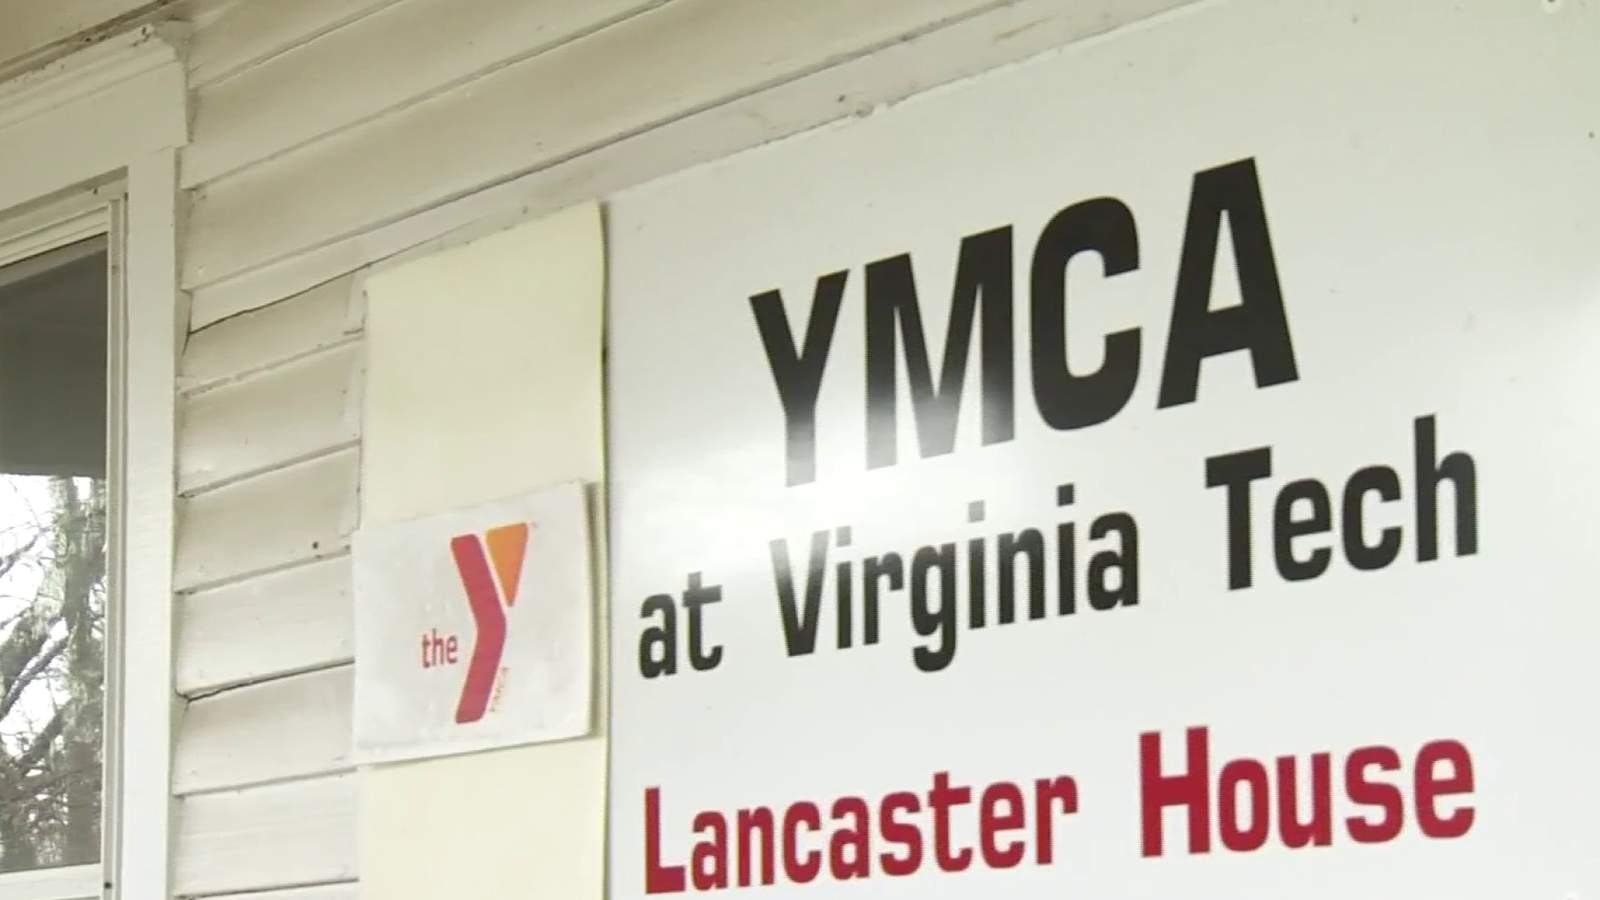 How the YMCA at Virginia Tech is bridging the online learning gap